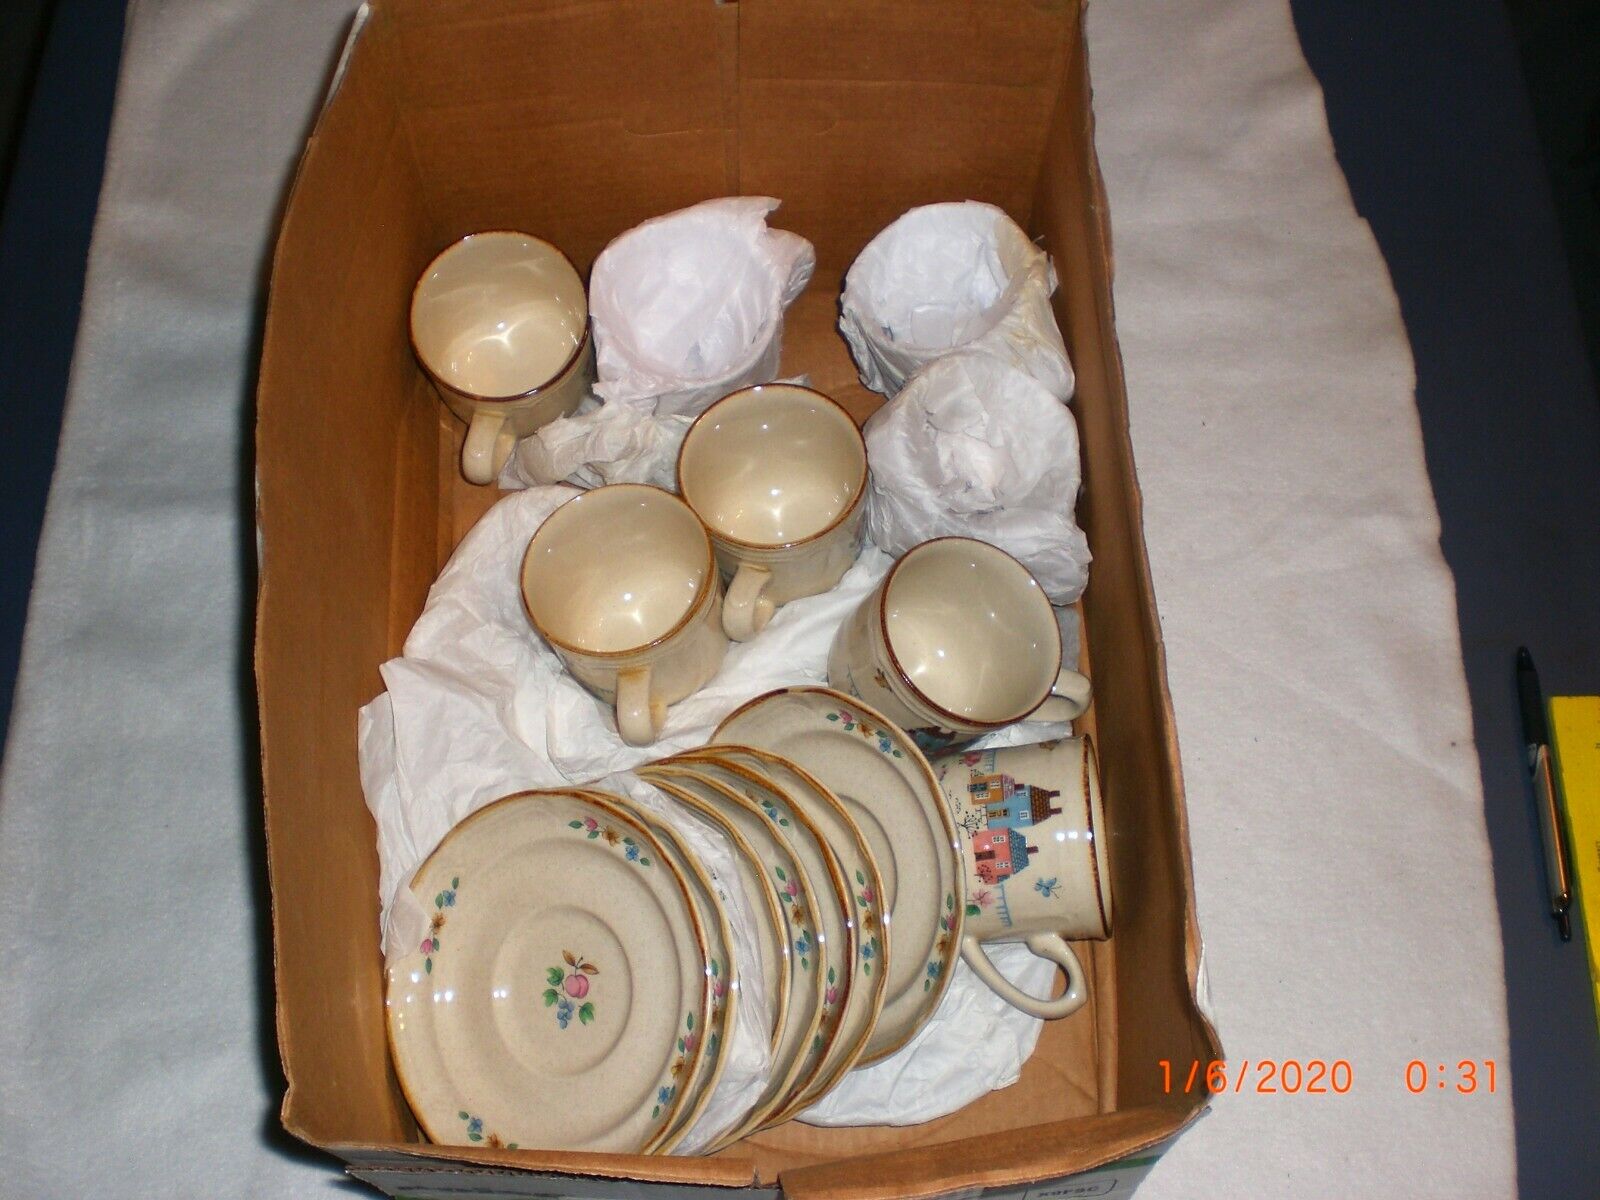 Set of 8 International Tableworks Heartland Village Cups and Saucers  Louisville Stoneware International Tableworks Heartland Village